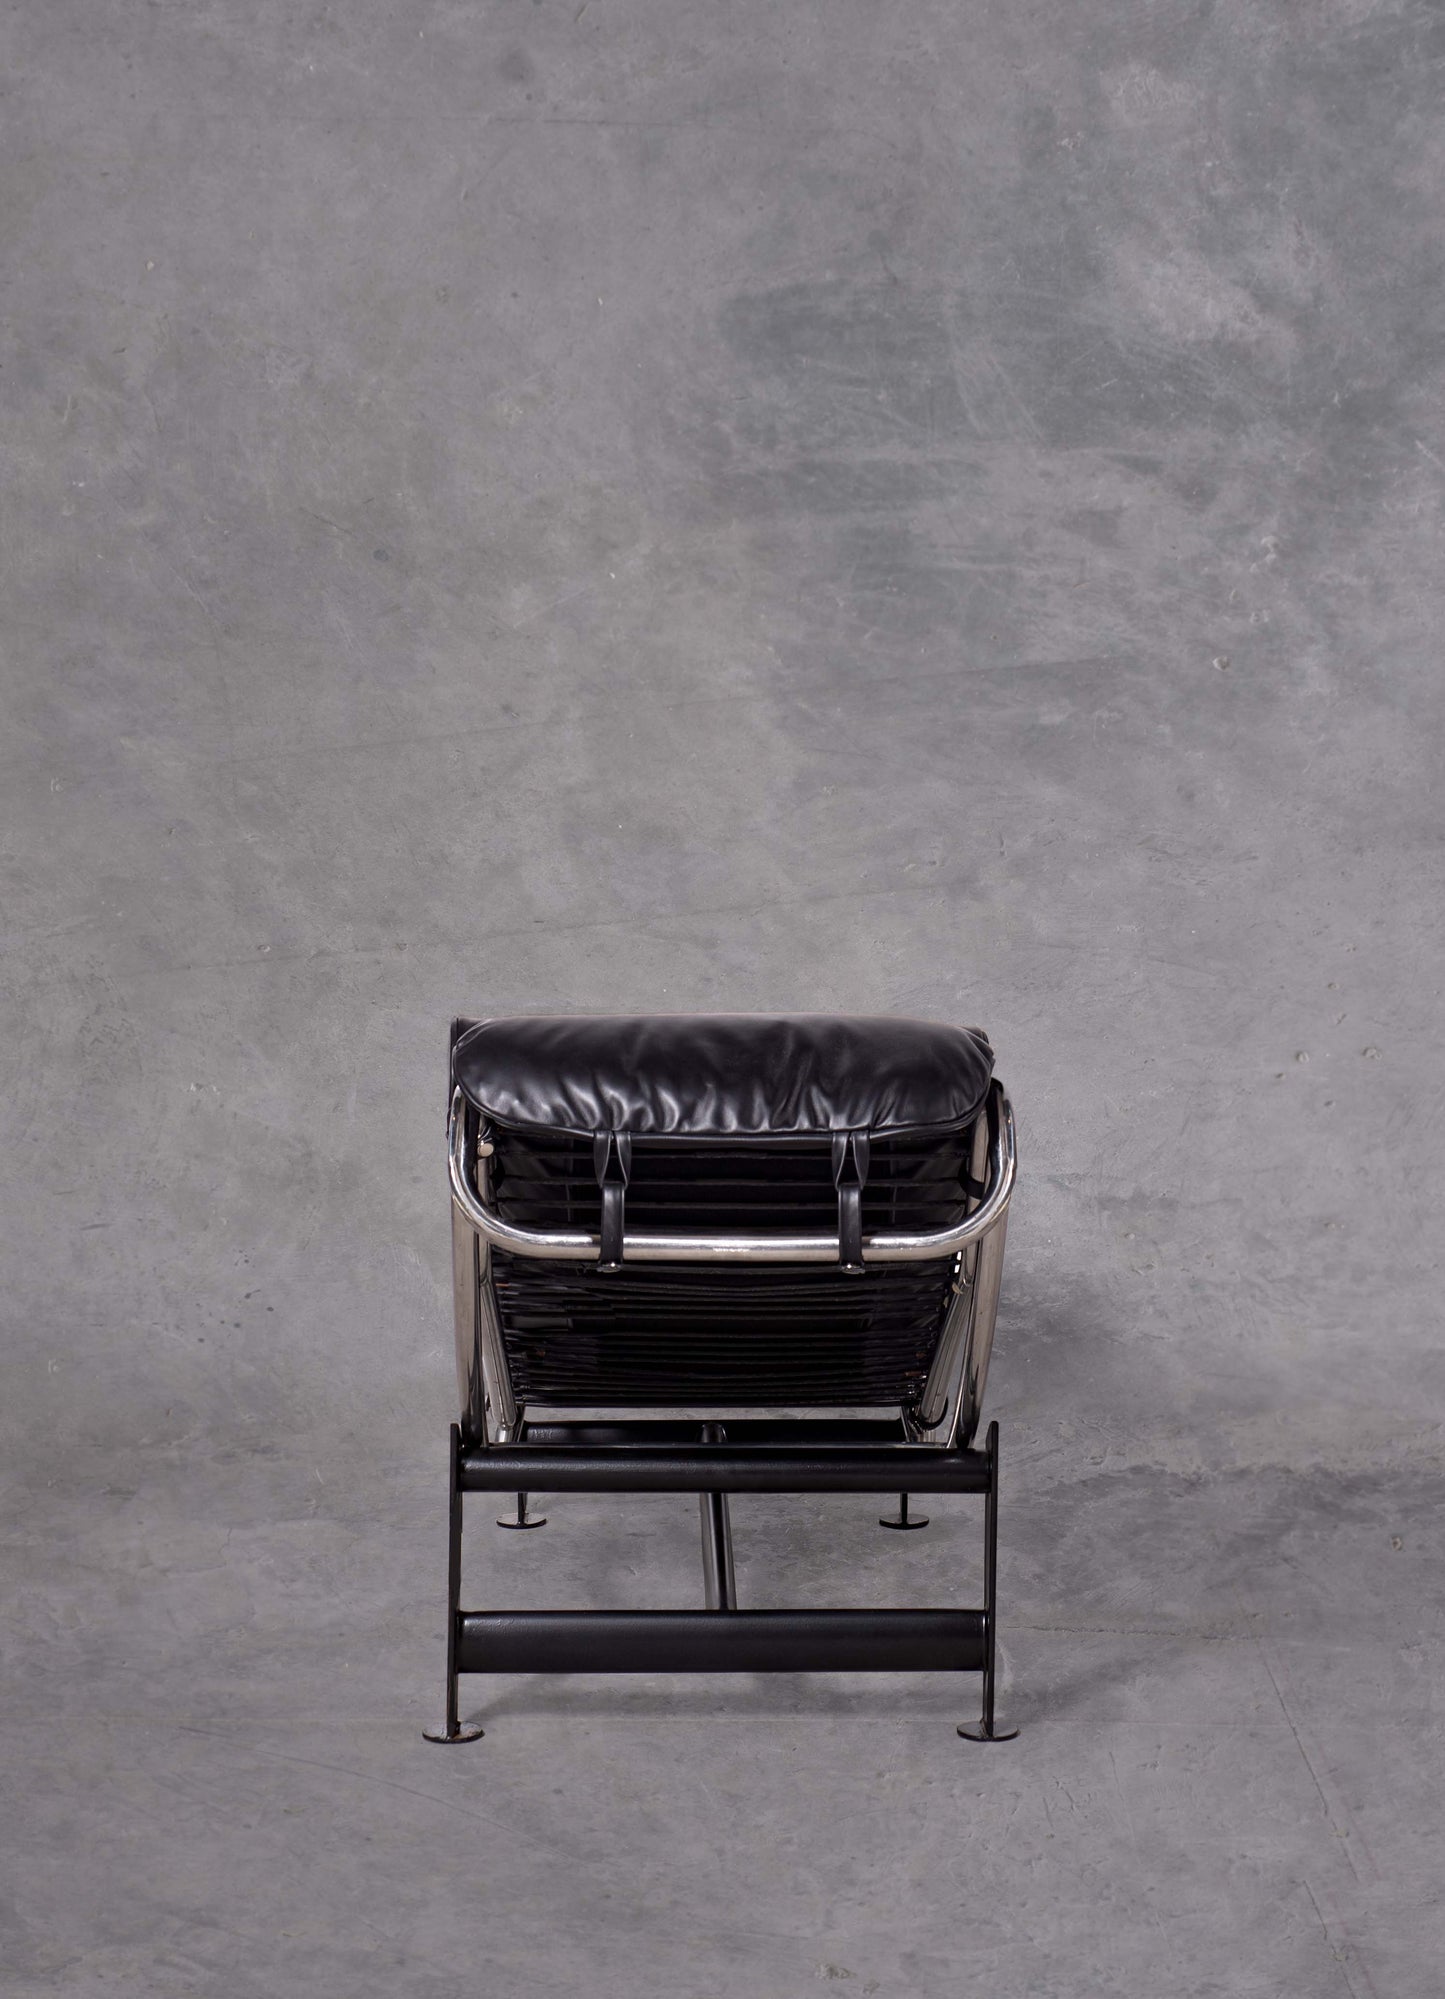 Vintage 1970s Chaise Lounge in the style of Le Corbusier and Charlotte Perriand for Cassina